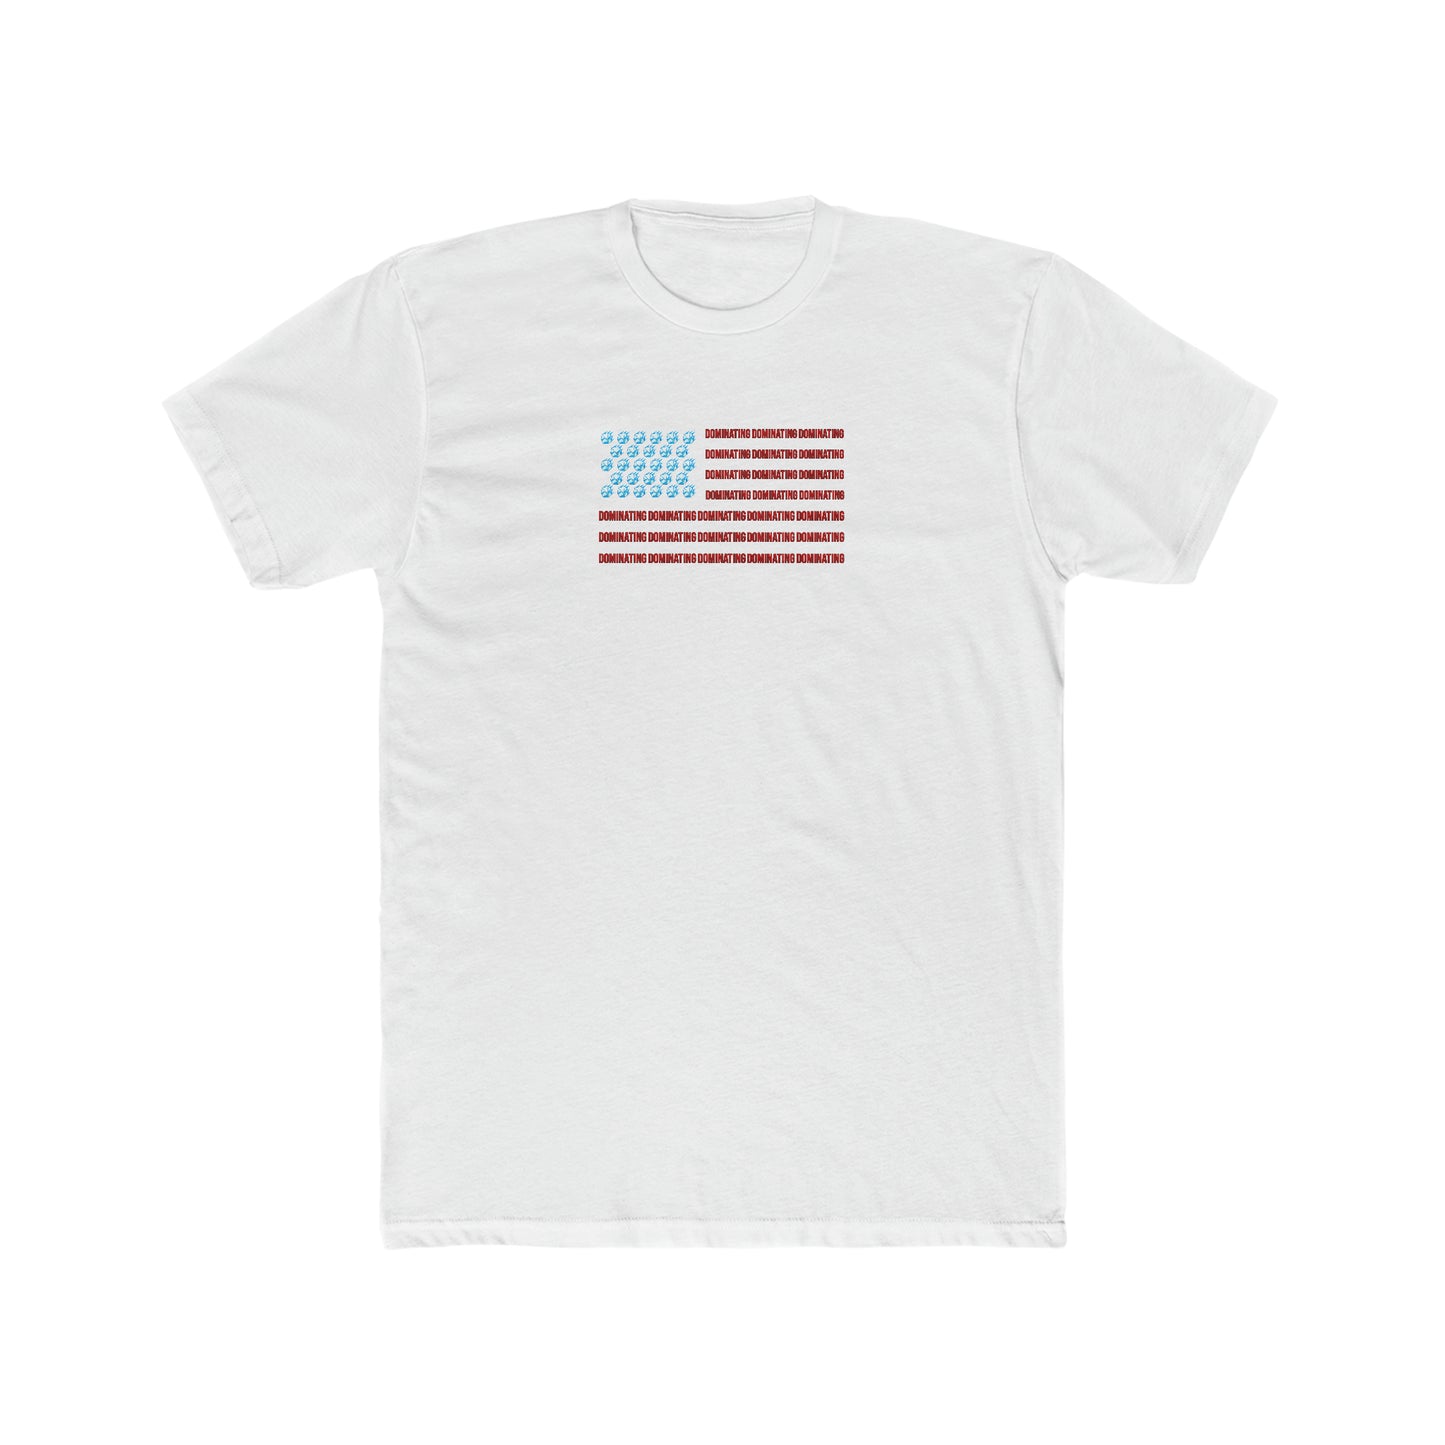 DOMINATING FLAG TEE - Never Stop Chasing